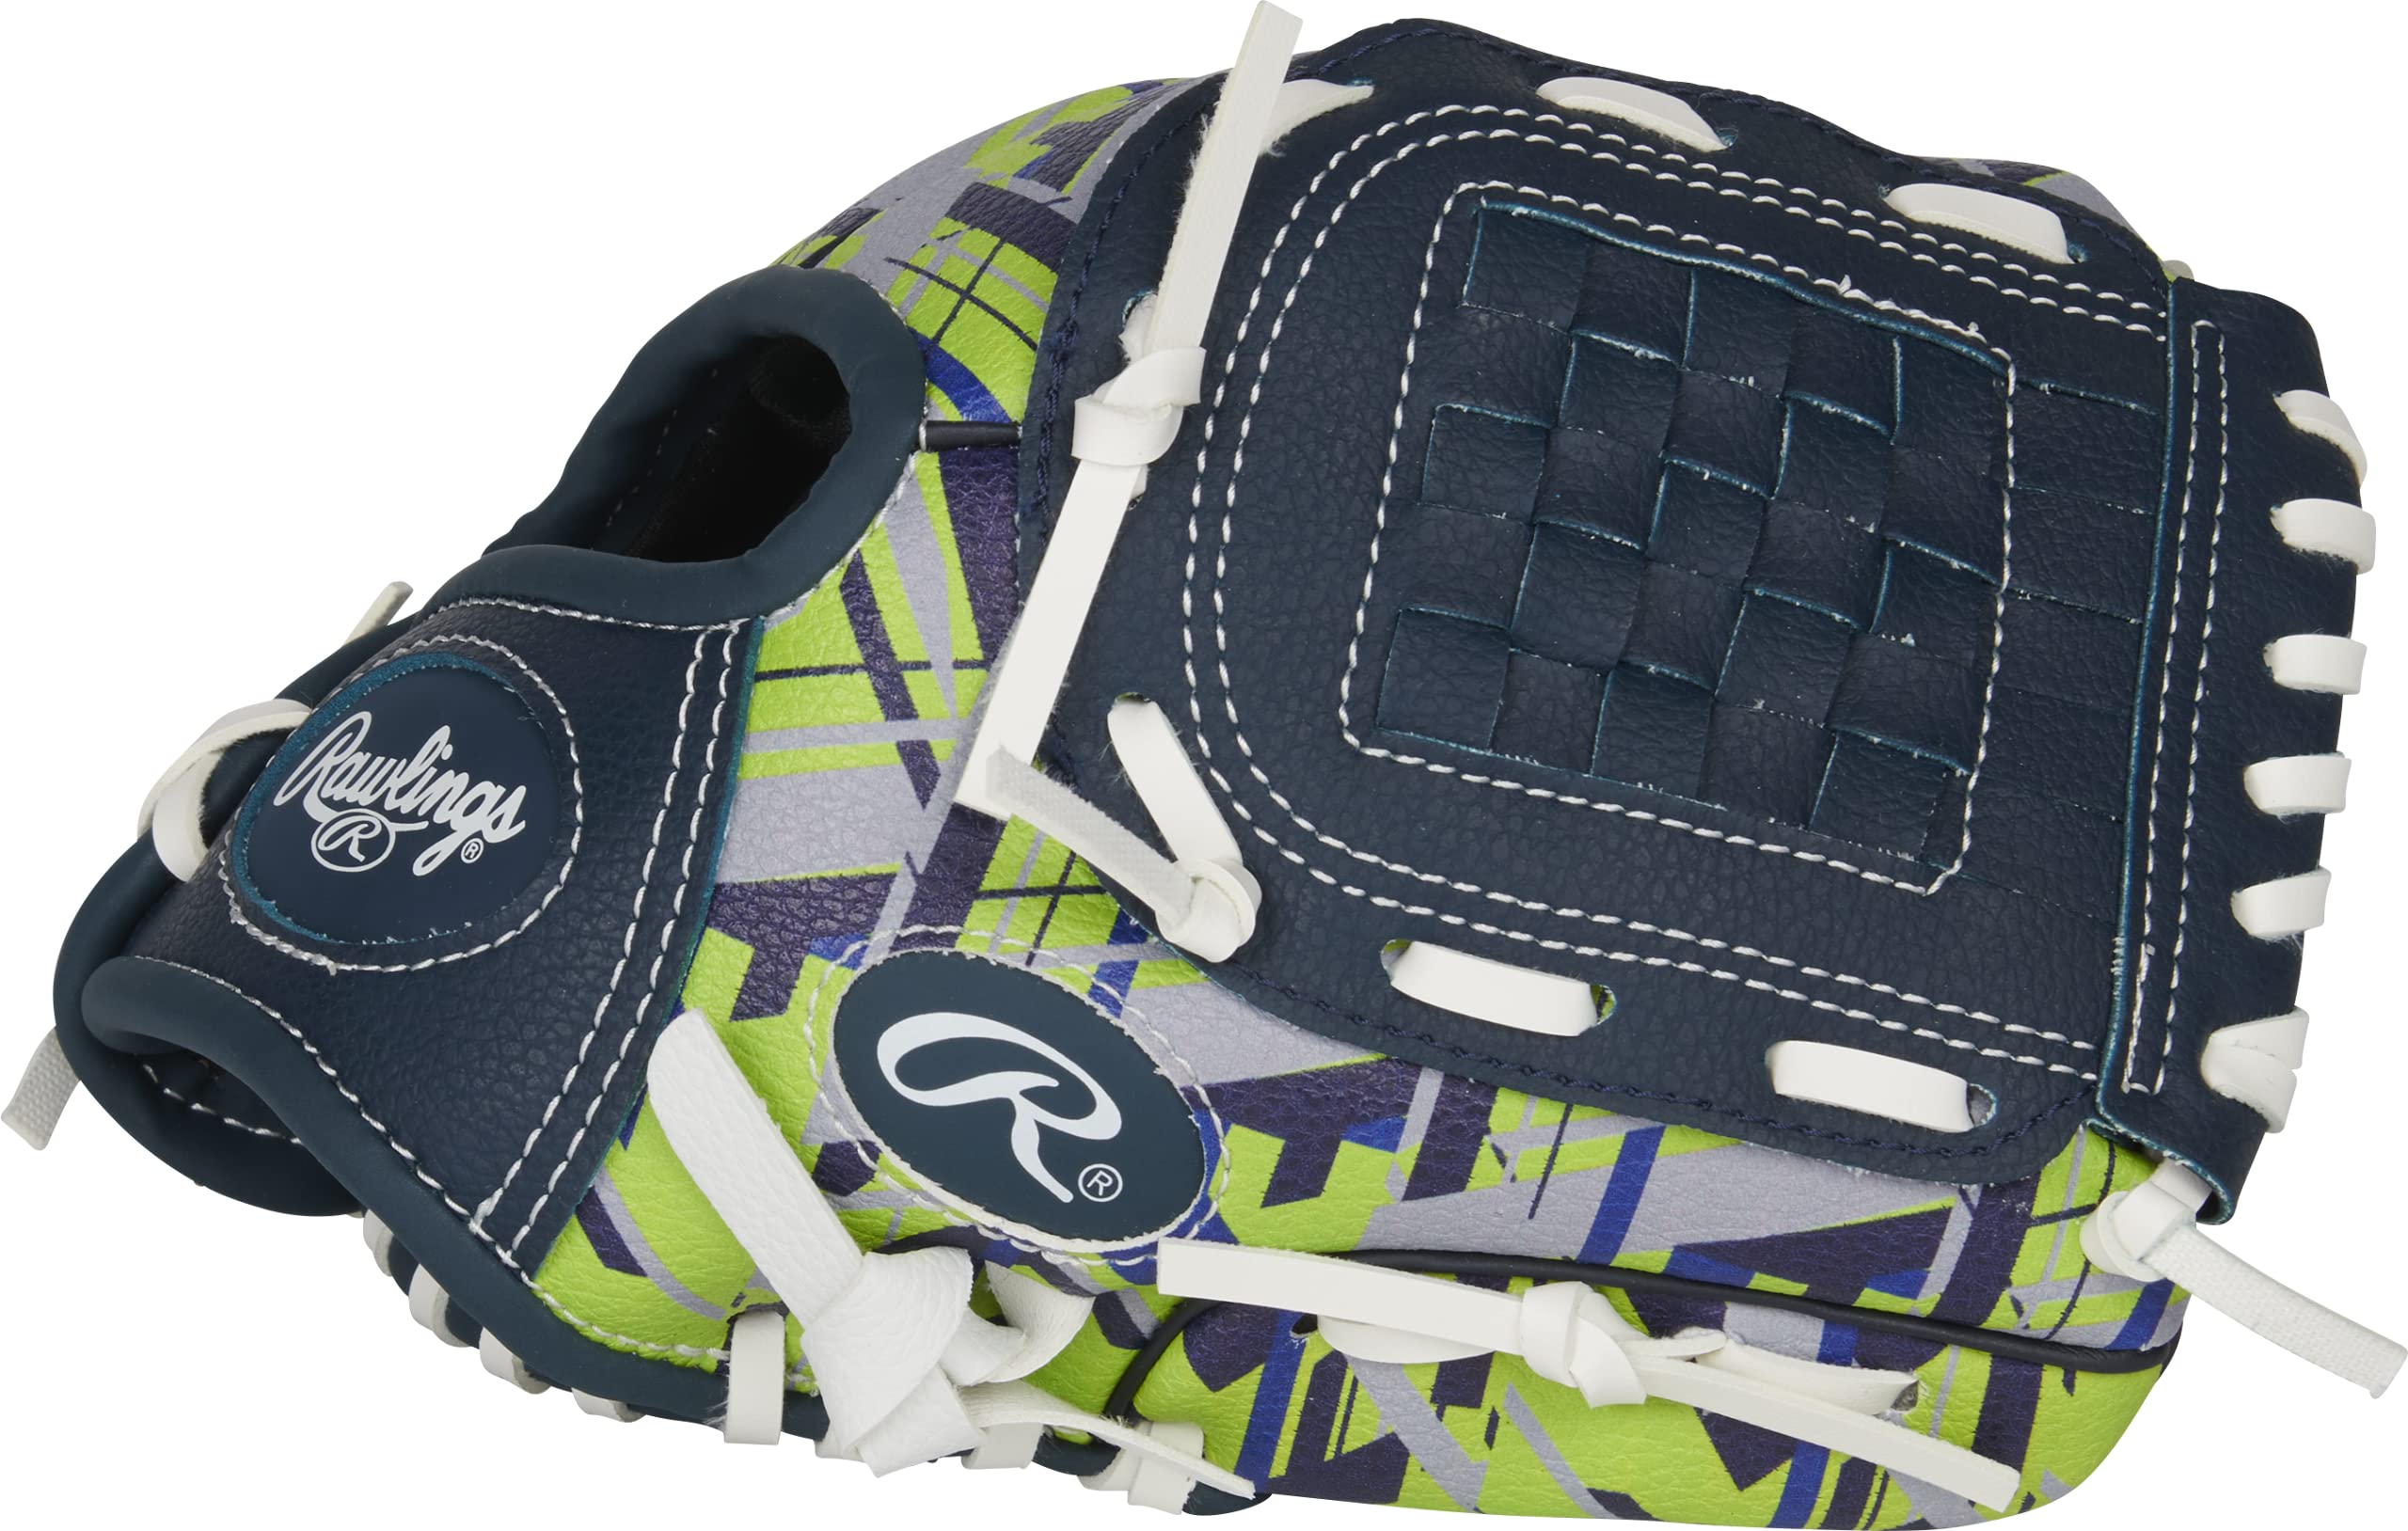 Rawlings Remix glove Series  T-Ball & Youth Baseball gloves  Right Hand Throw  9  green